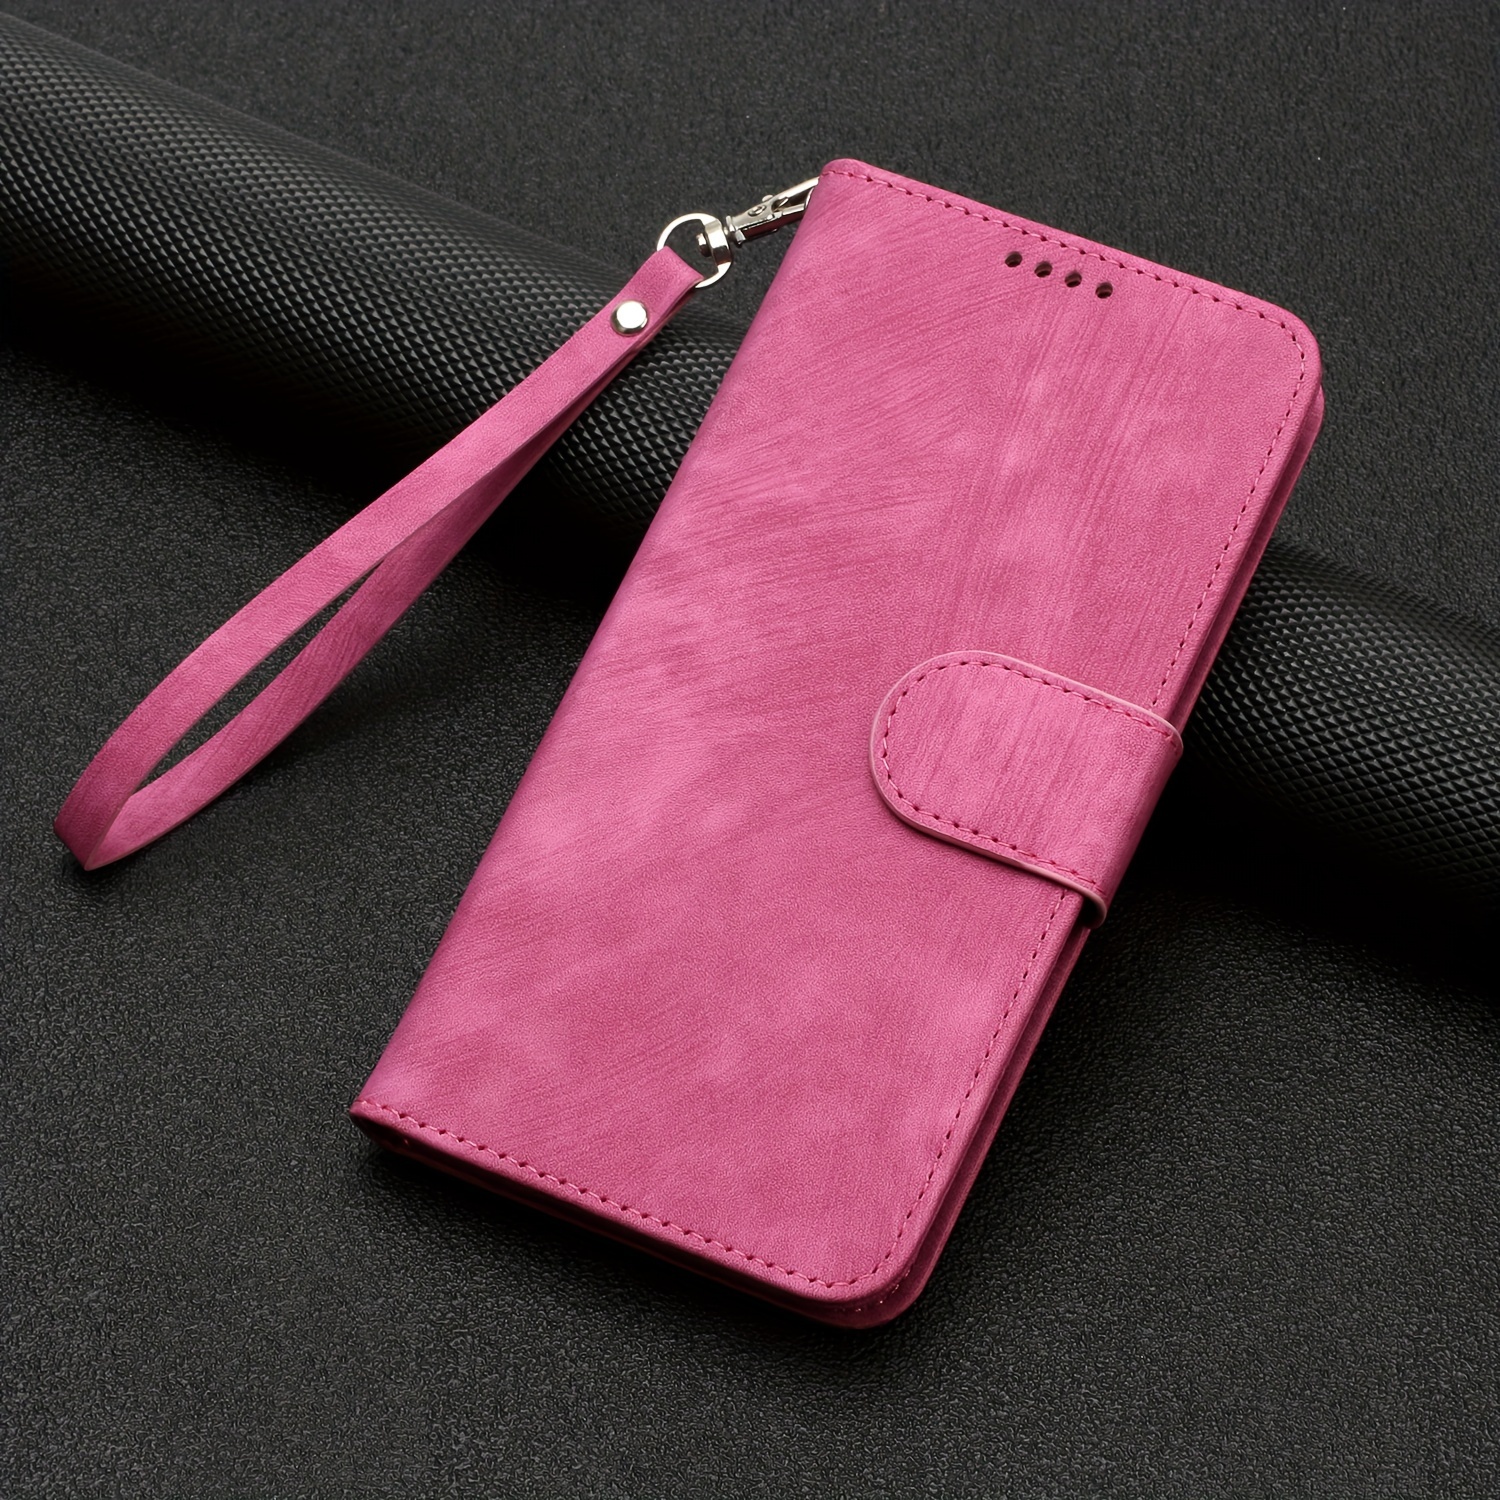 Cover For Oppo Reno 10 Pro Case Luxury PU Leather Soft Silicone Phone Case  For Reno